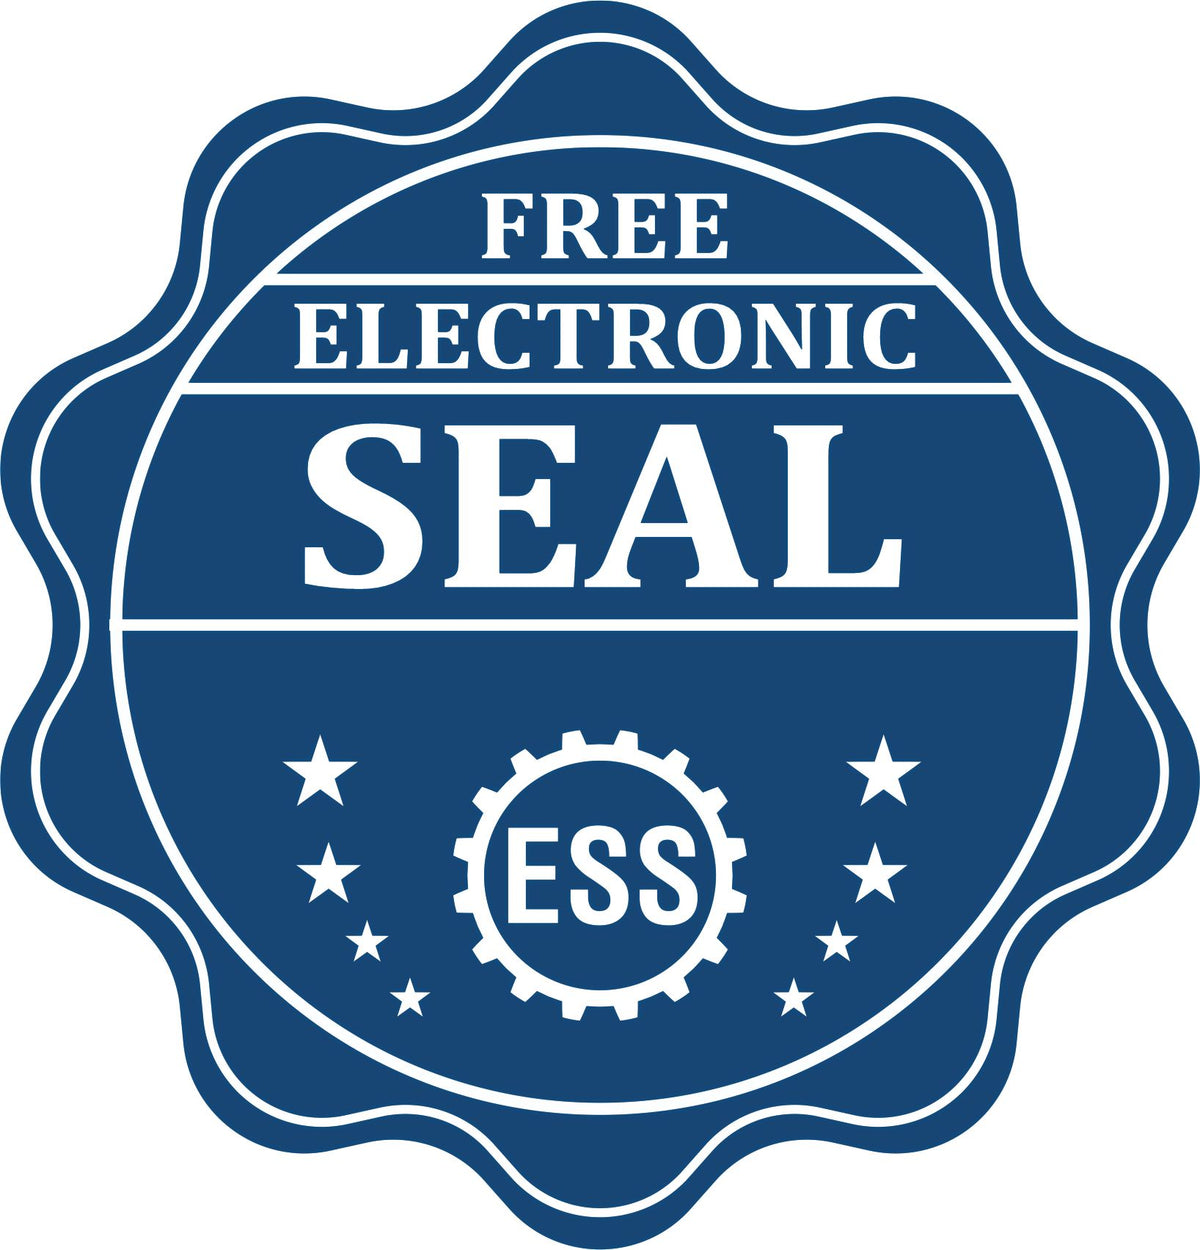 A badge showing a free electronic seal for the Hybrid Louisiana Architect Seal with stars and the ESS gear on the emblem.